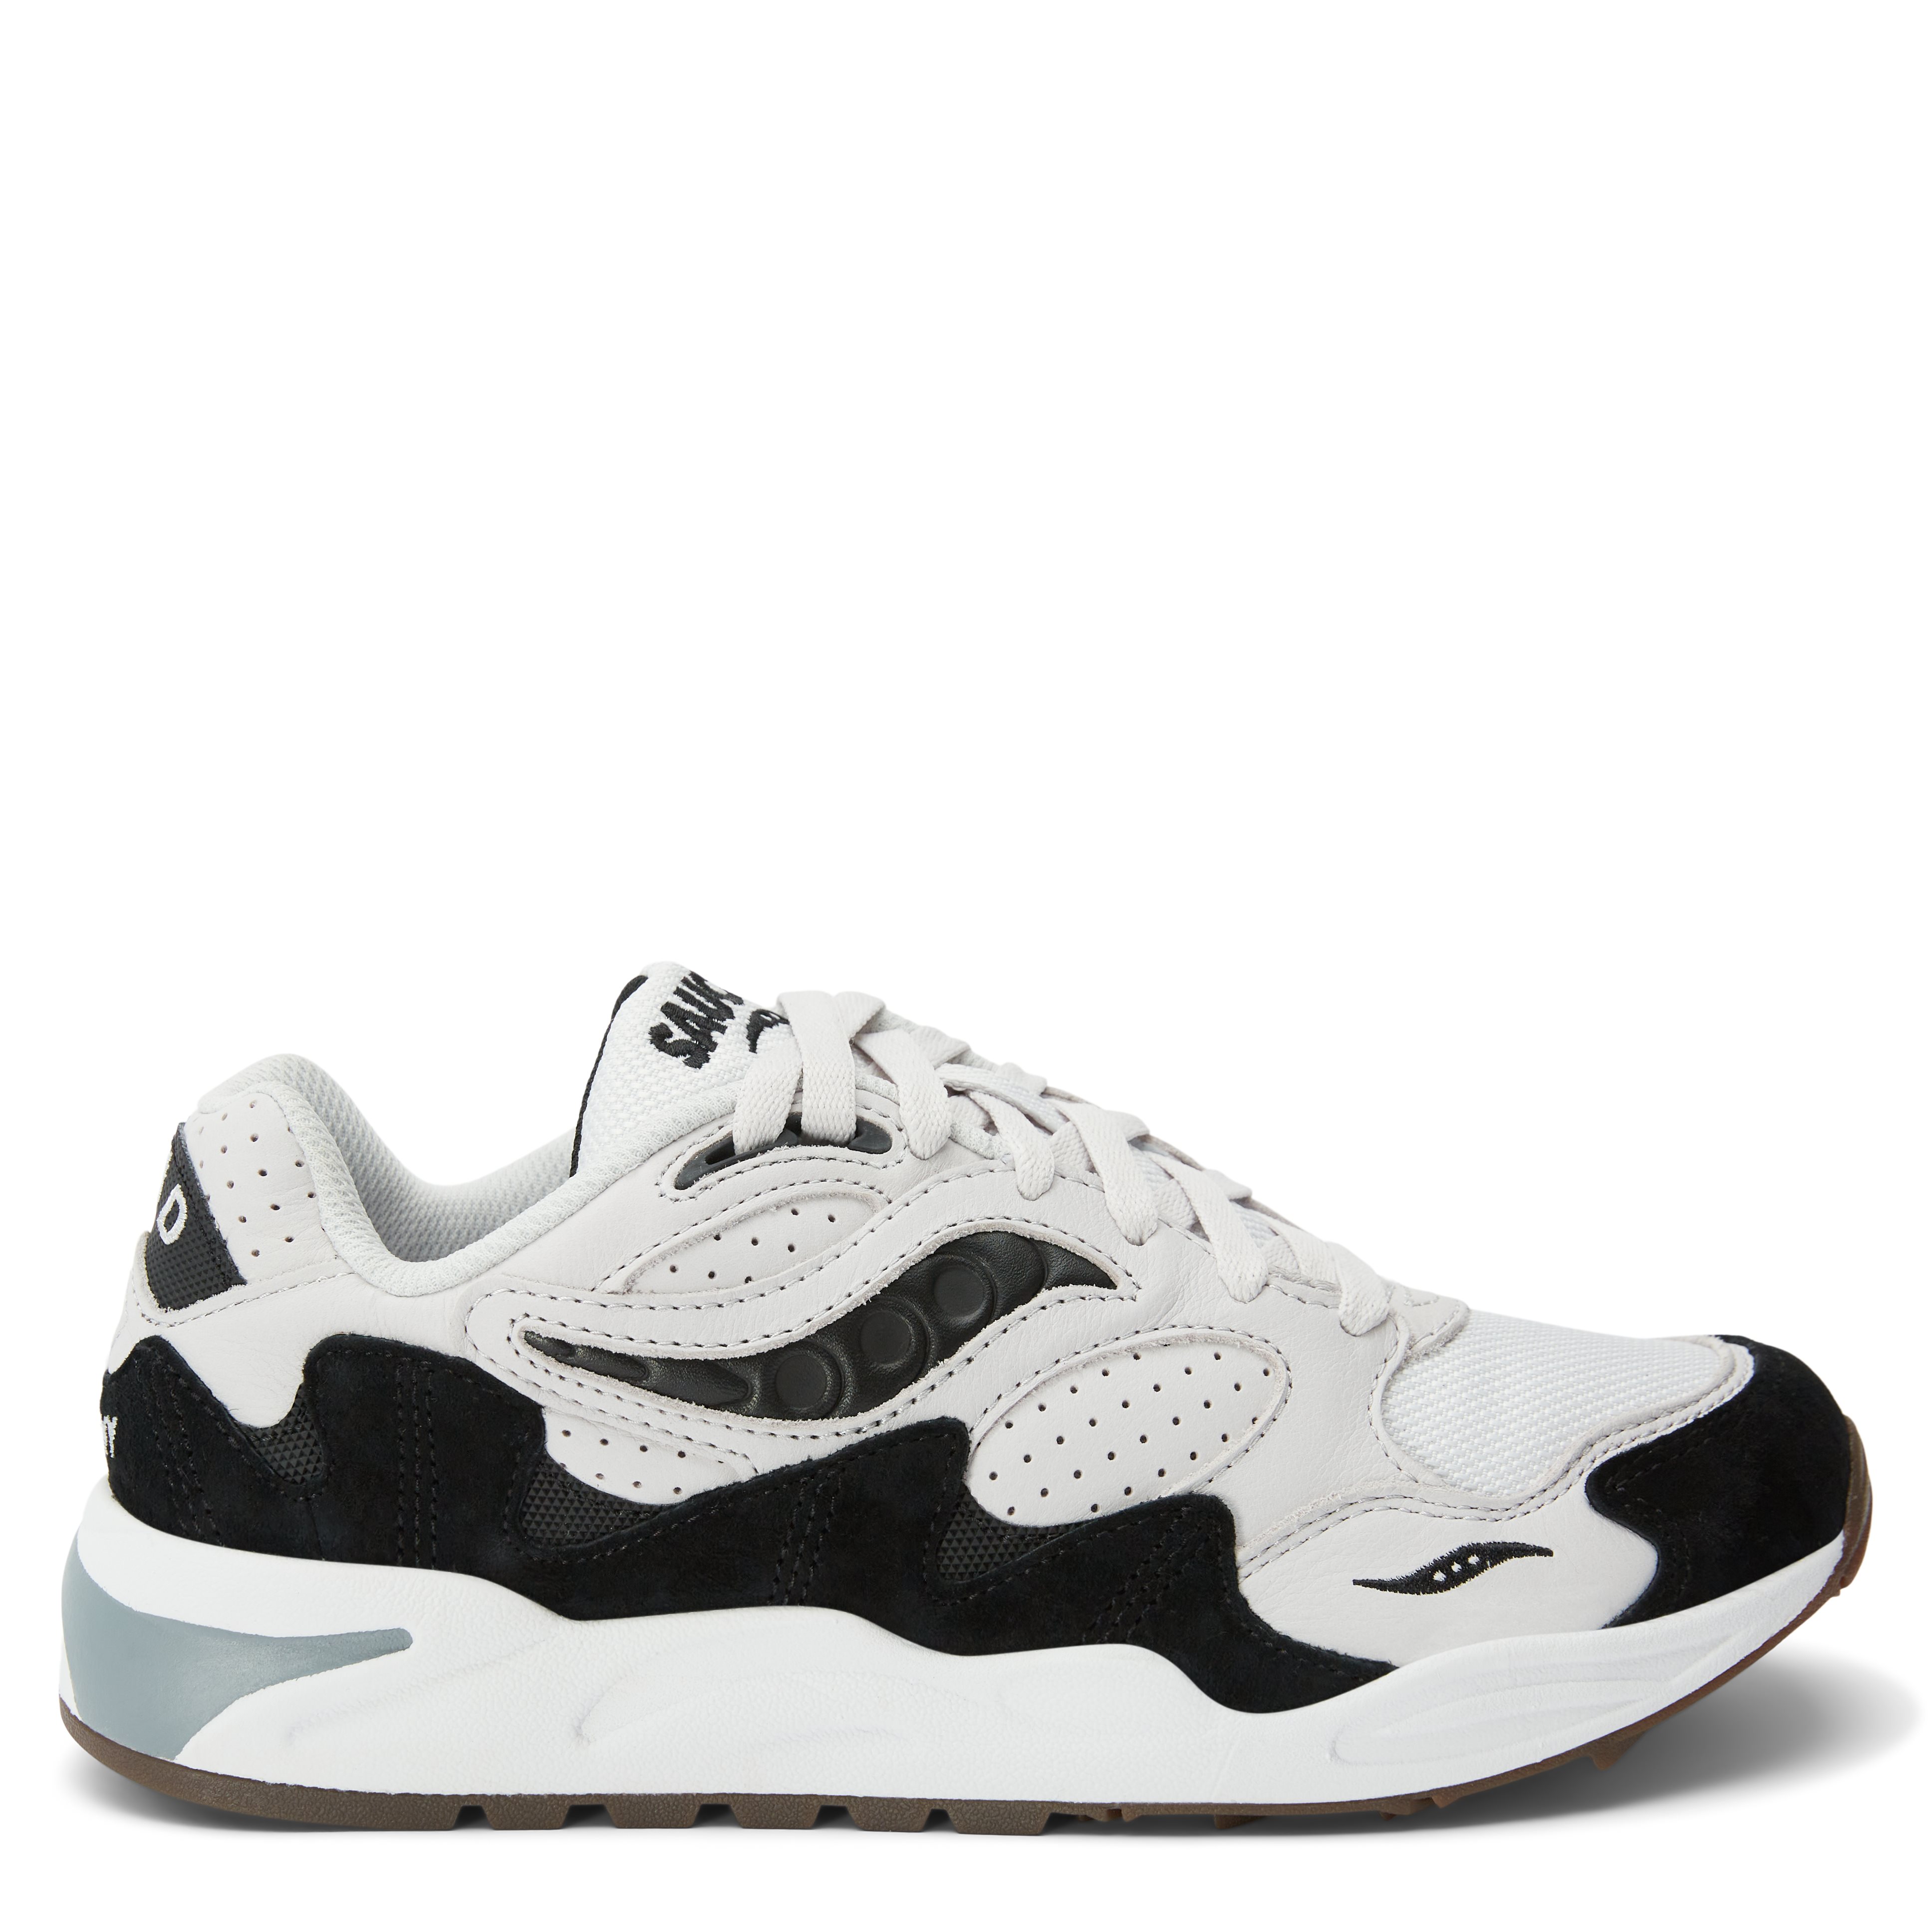 Saucony Shoes GRID SHADOW 2 S70773 Grey